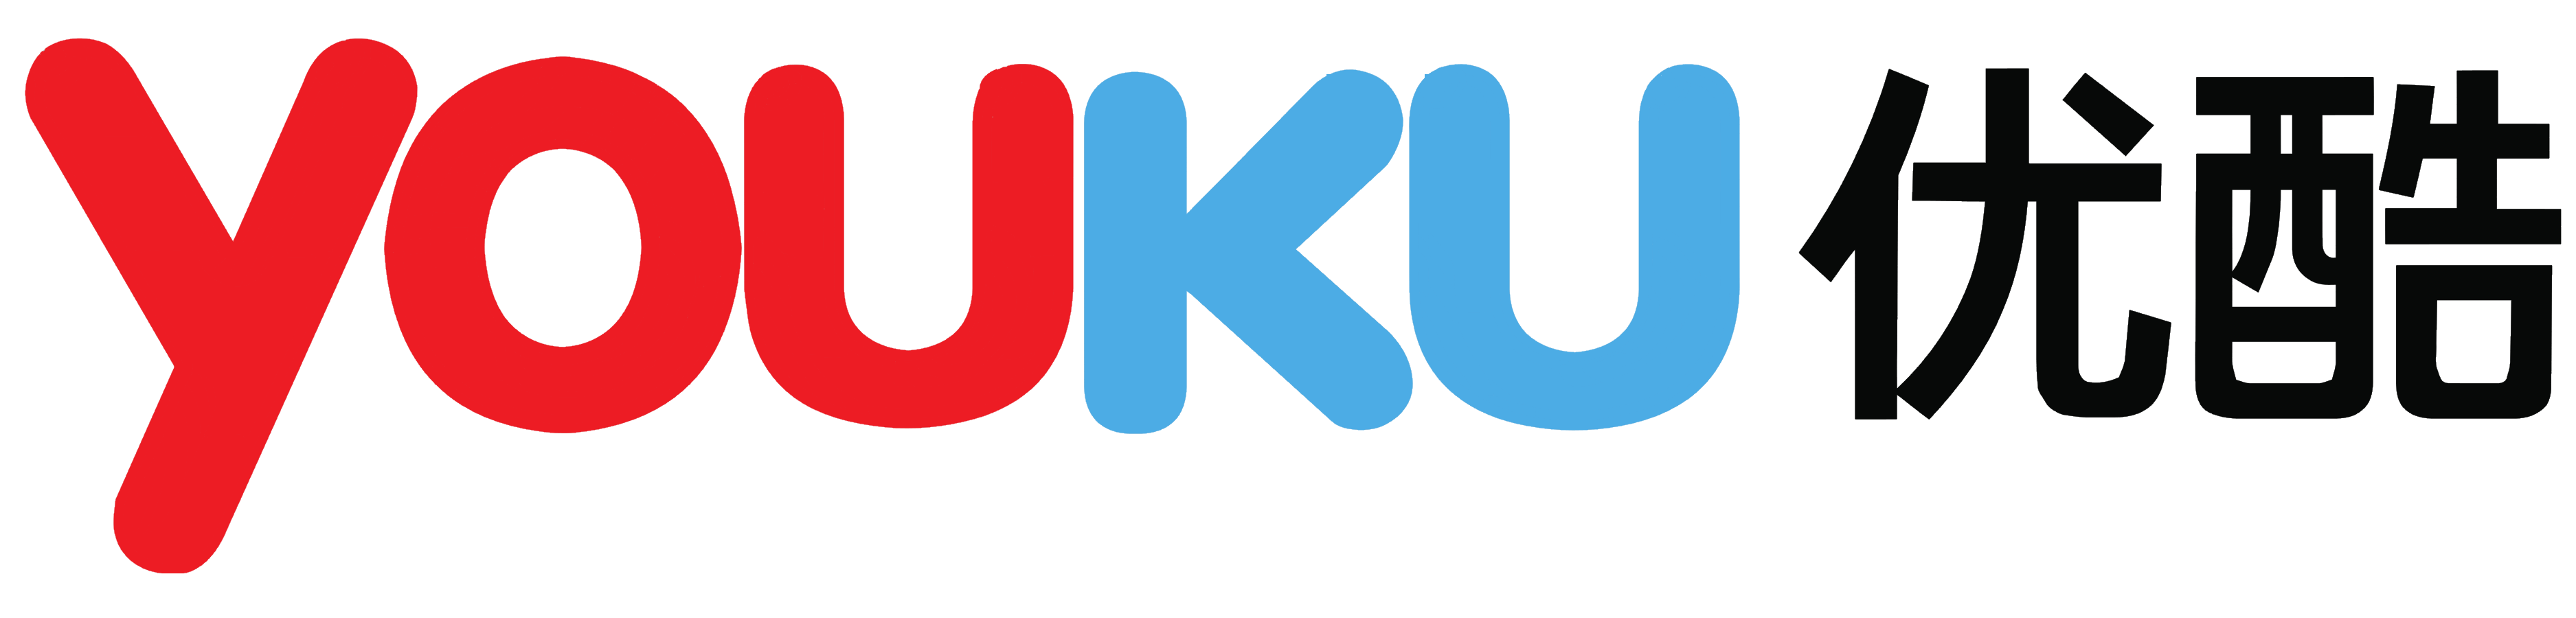 Tutorial How to Install YouKu